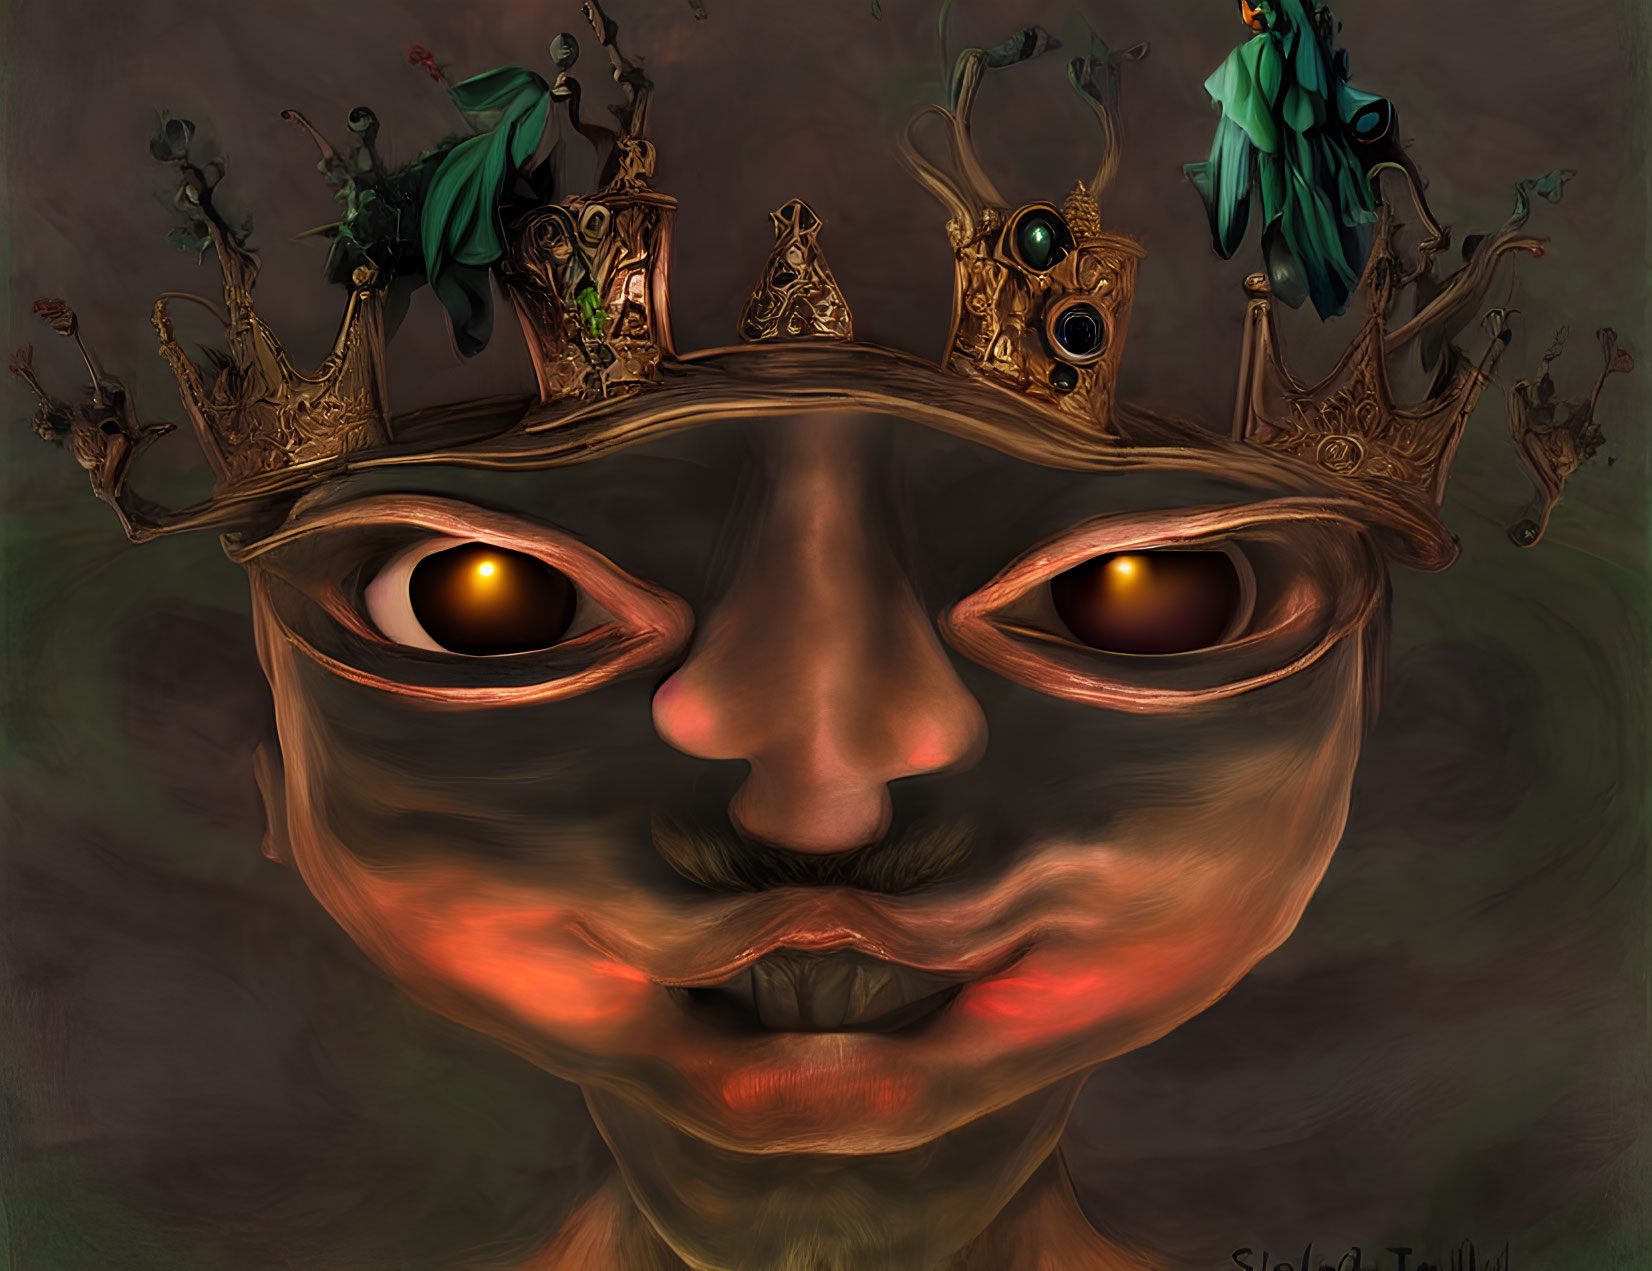 Surreal artwork: Face with golden eyes, small crowns with green insects, dark background